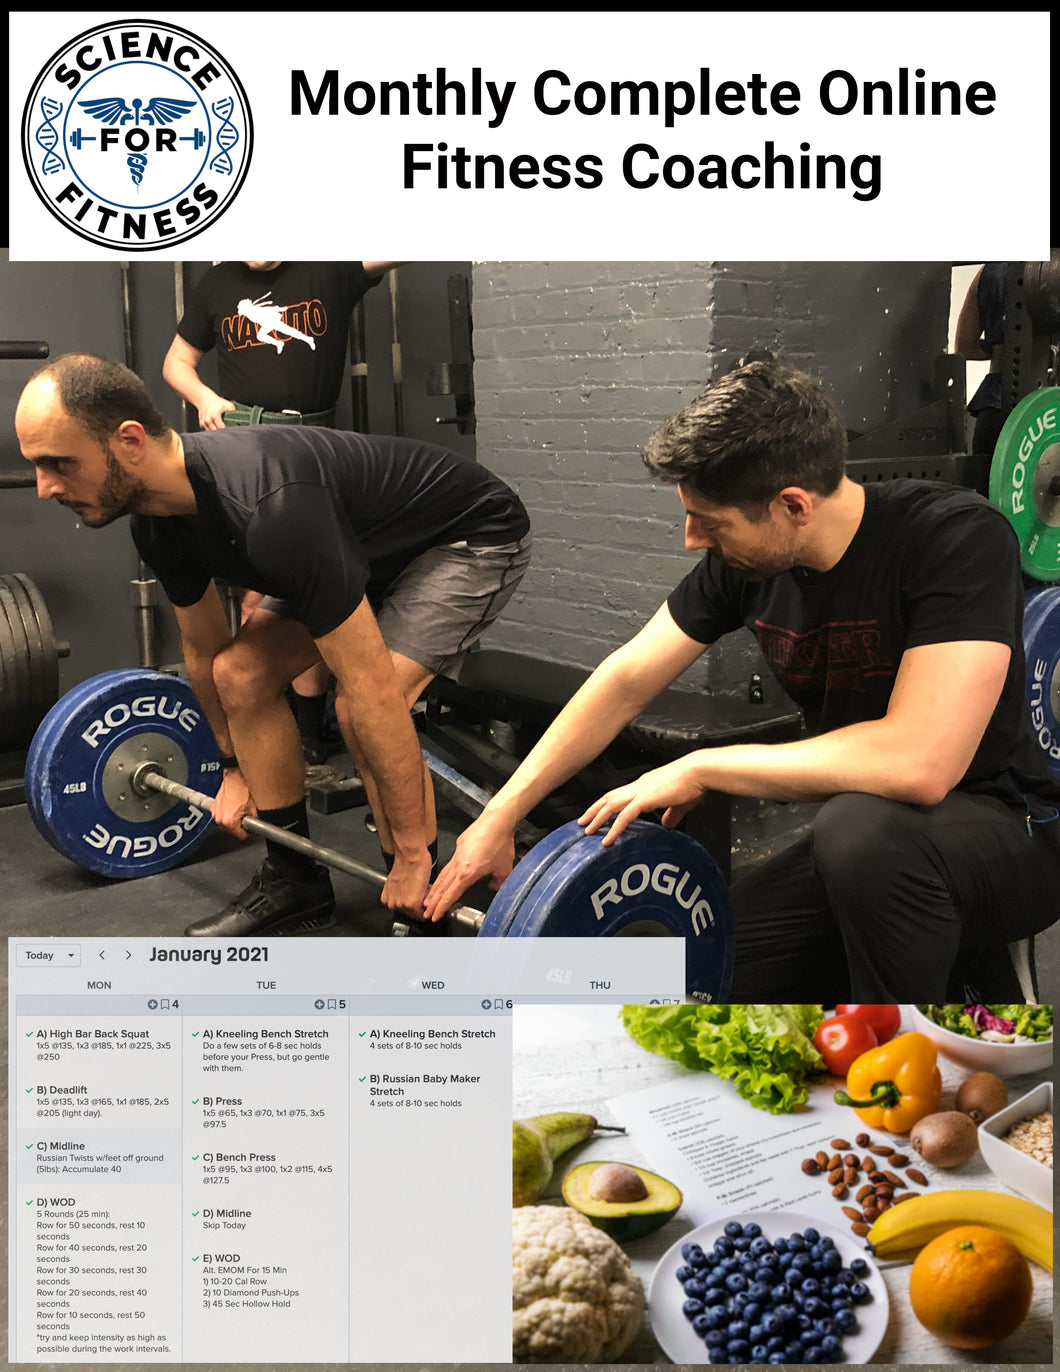 Monthly Complete Online Fitness Coaching